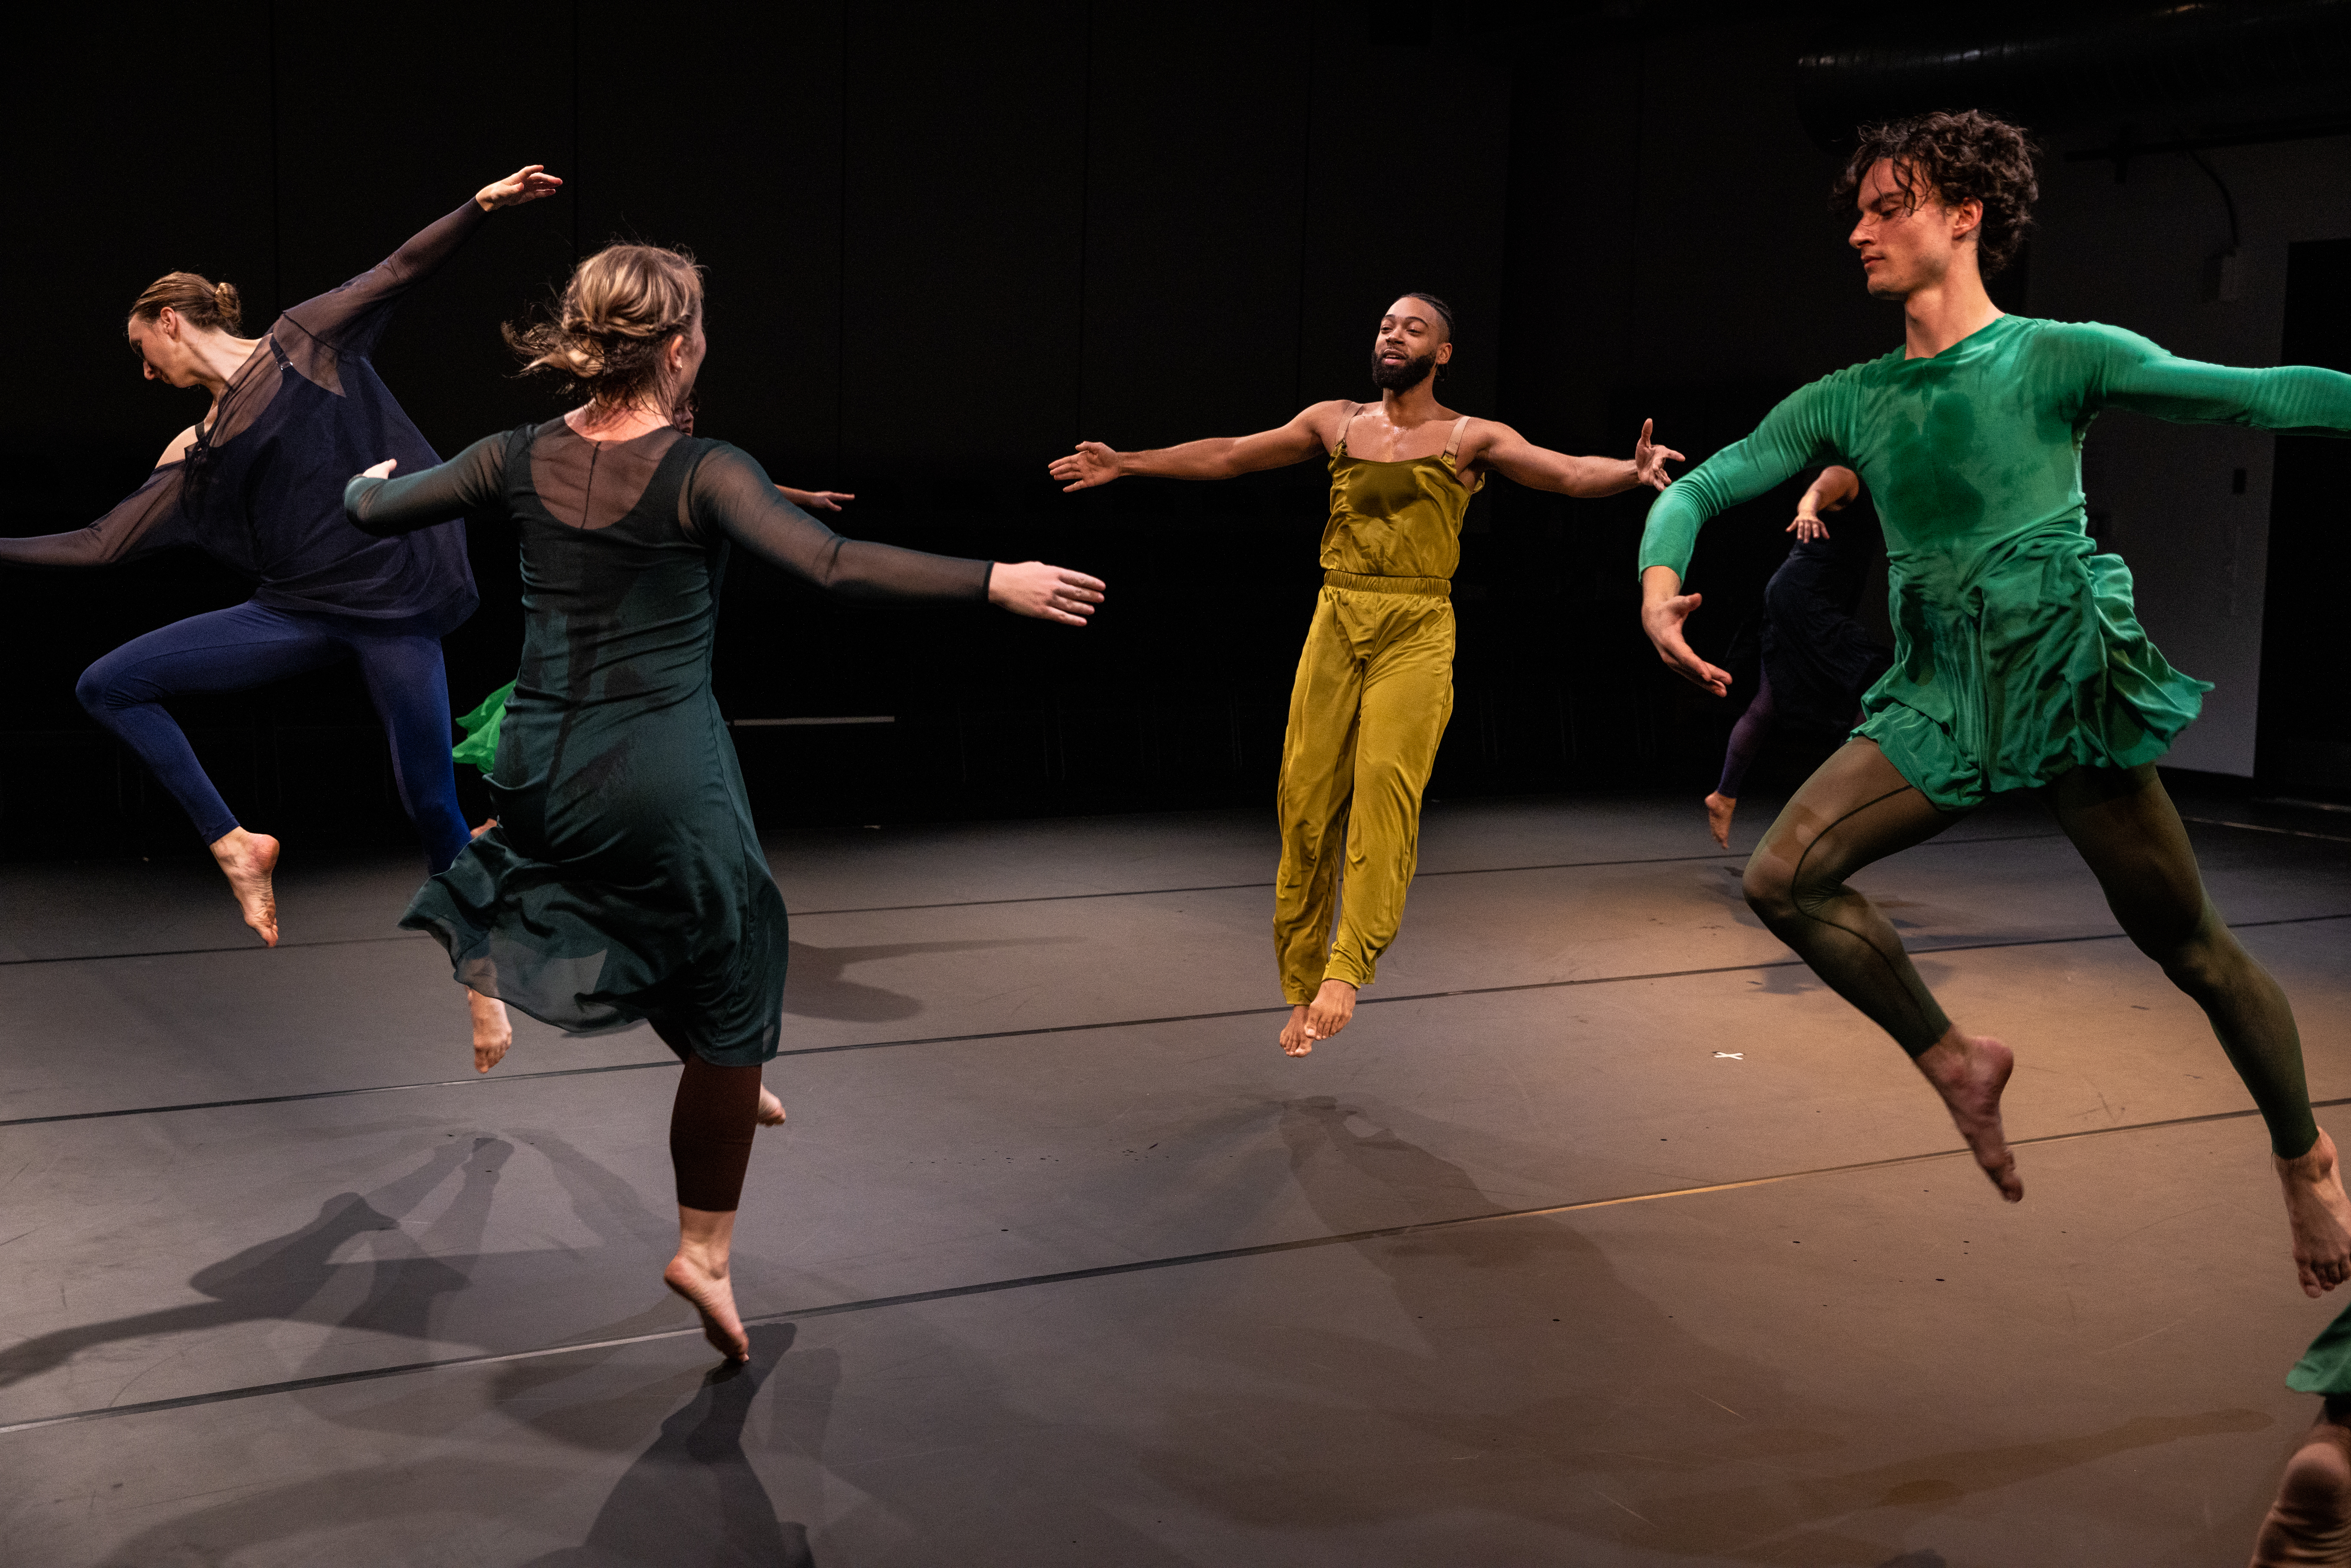 Four dancers in earth-toned, flowing outfits are leaping in air in a circular formation.